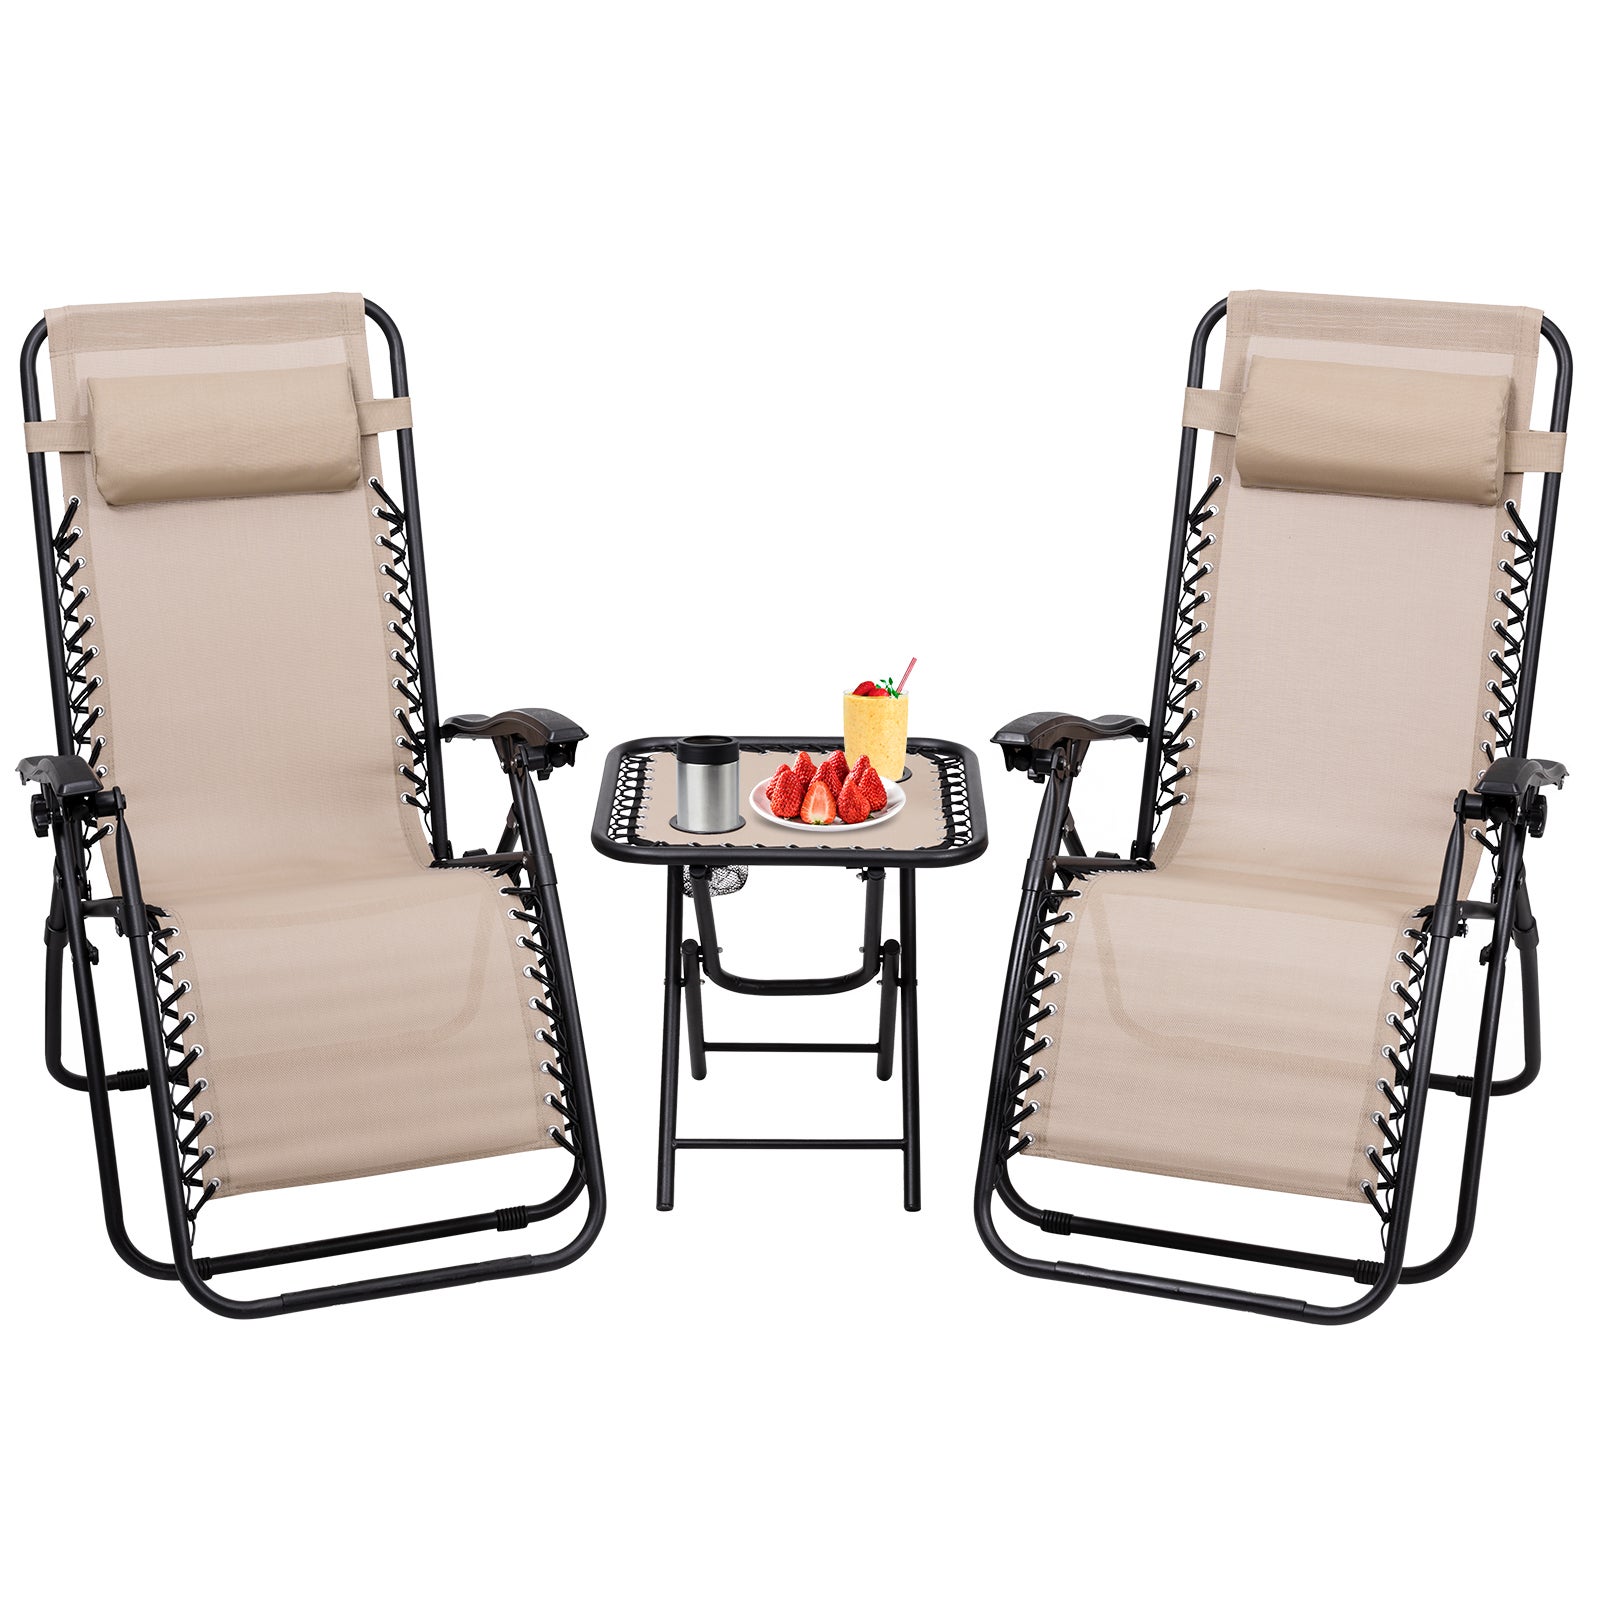 3pc Outdoor Zero Gravity Reclining Lounge Chairs Set With Table